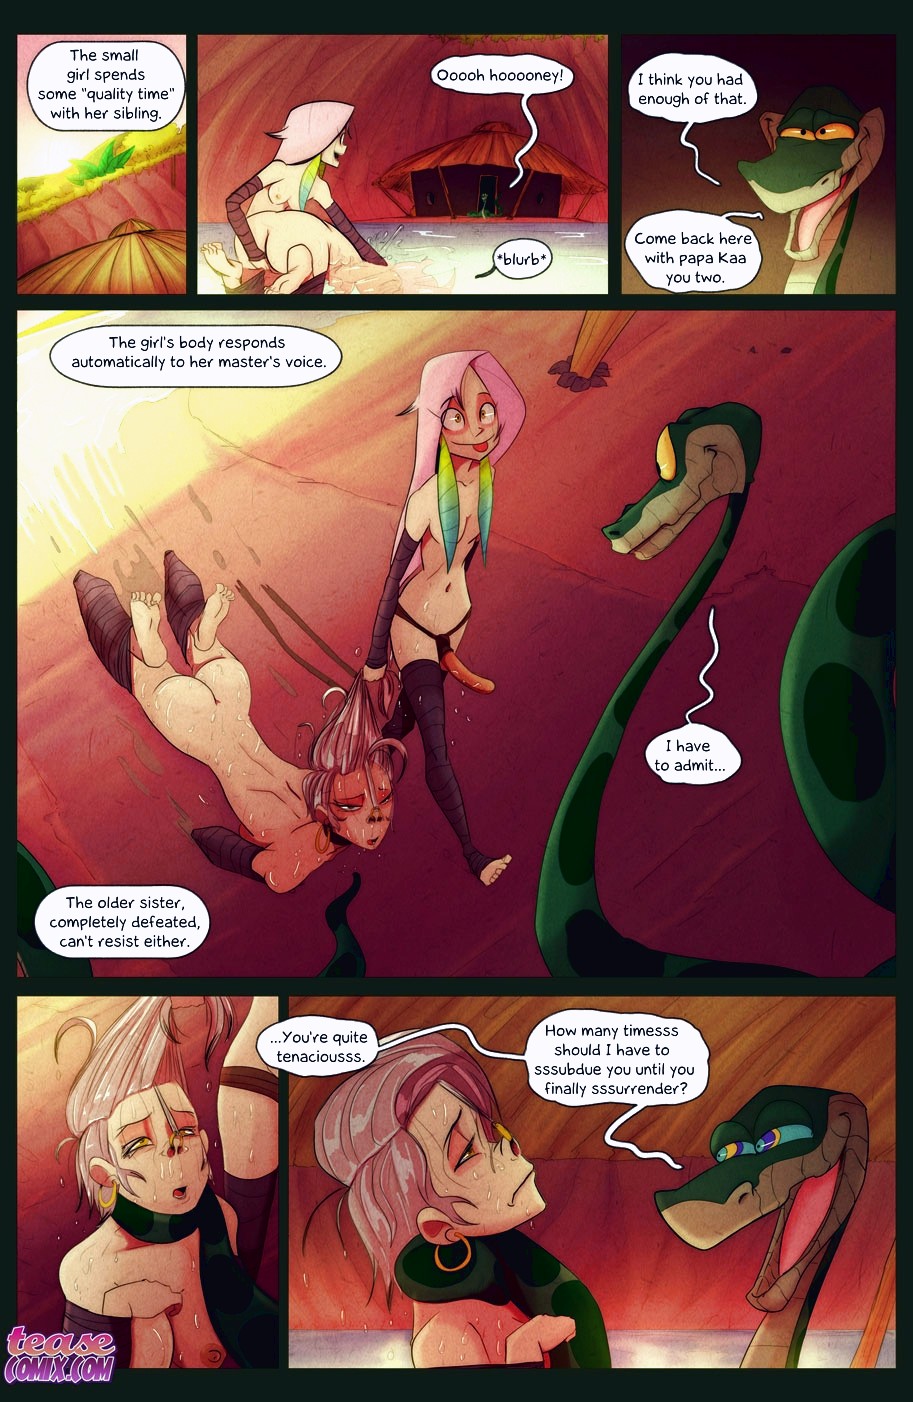 The Snake and The Girl 5 page 04